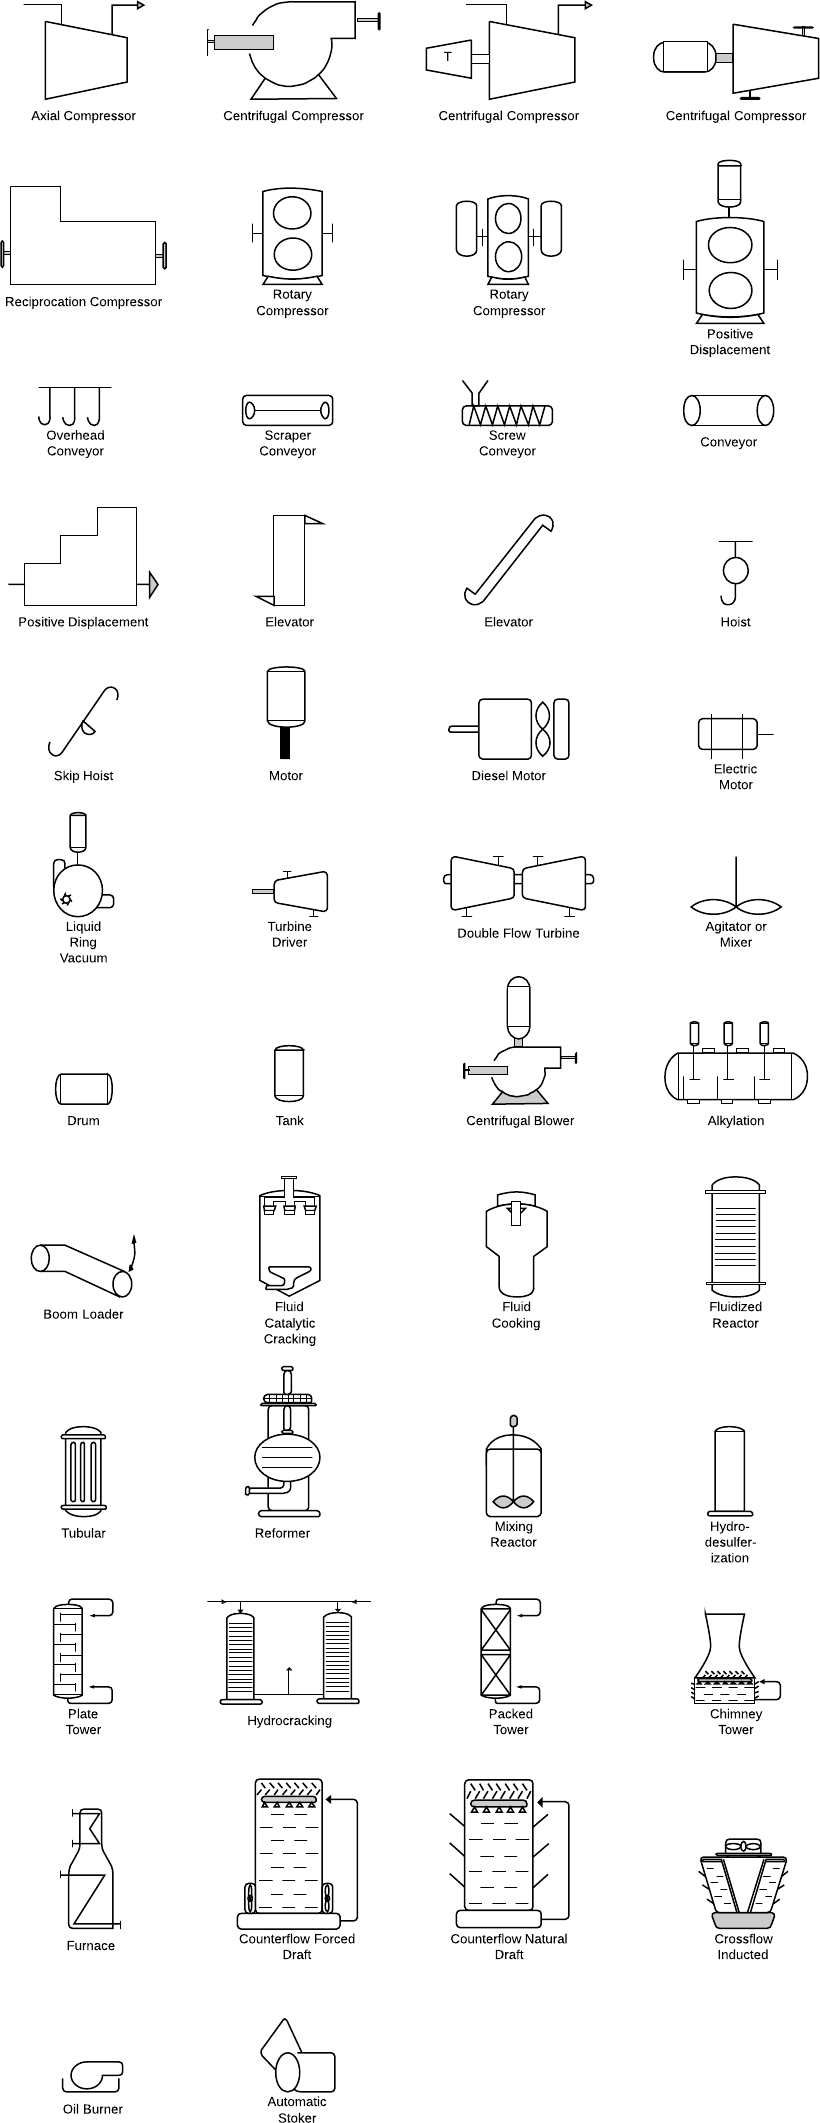 isometric piping drawing tools